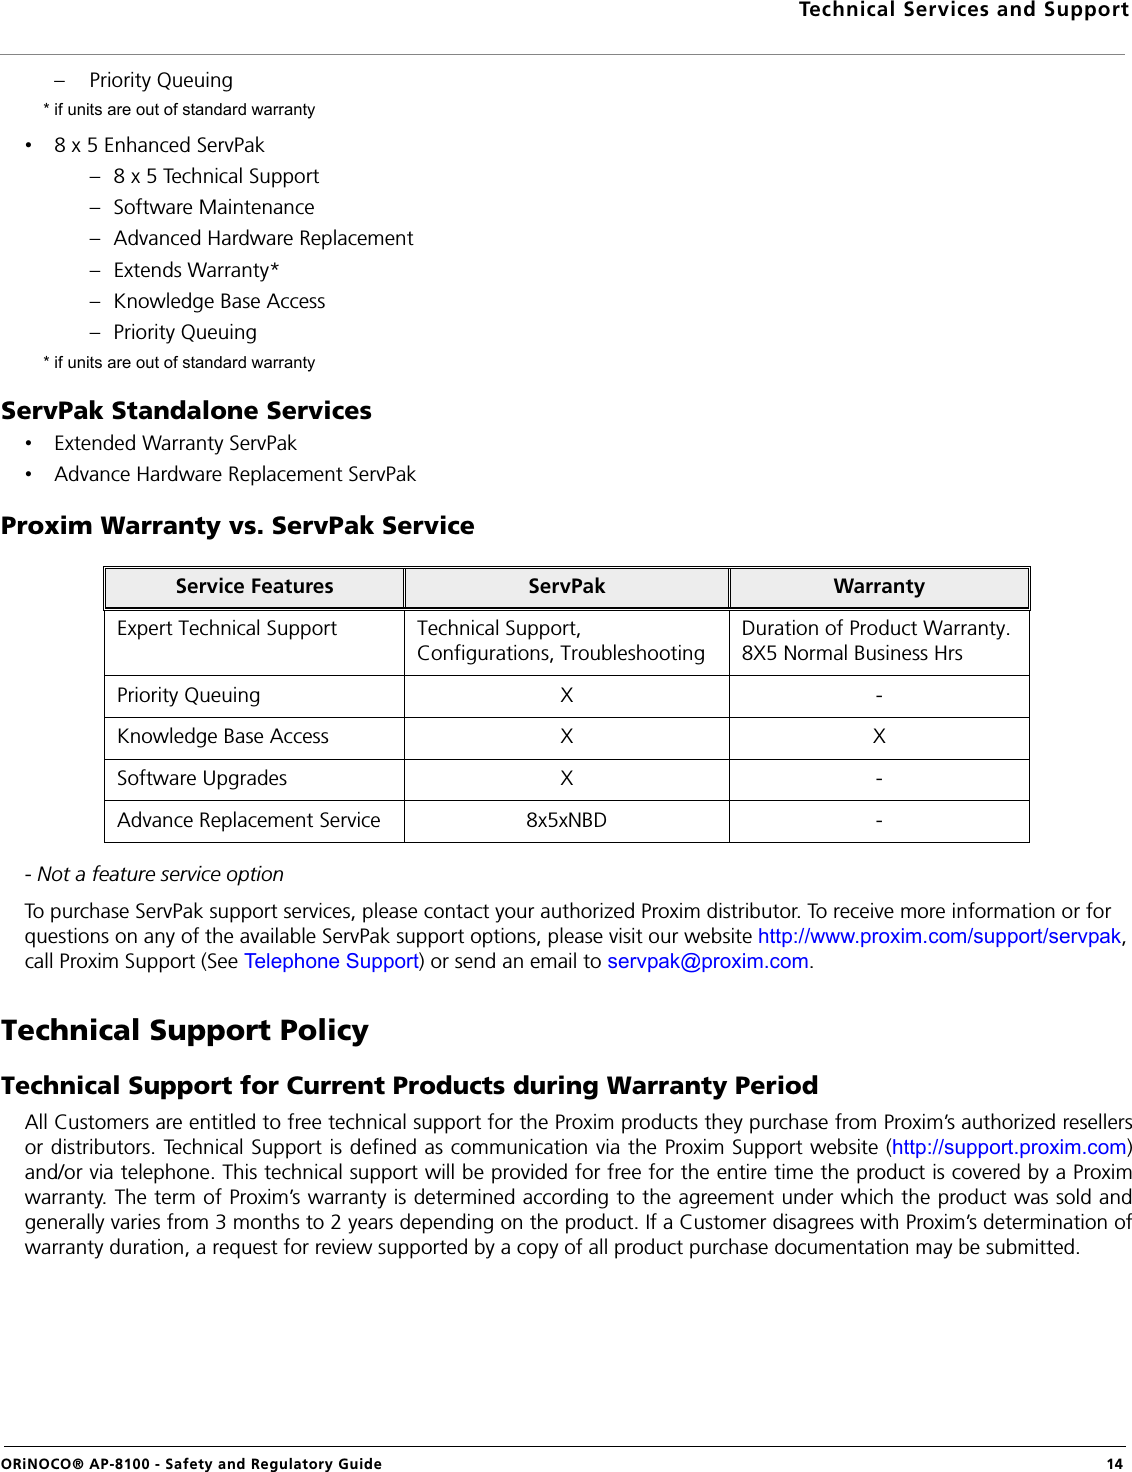 Technical Services and SupportORiNOCO® AP-8100 - Safety and Regulatory Guide  14– Priority Queuing * if units are out of standard warranty•8 x 5 Enhanced ServPak– 8 x 5 Technical Support– Software Maintenance– Advanced Hardware Replacement– Extends Warranty*– Knowledge Base Access– Priority Queuing * if units are out of standard warrantyServPak Standalone Services•Extended Warranty ServPak•Advance Hardware Replacement ServPakProxim Warranty vs. ServPak Service- Not a feature service optionTo purchase ServPak support services, please contact your authorized Proxim distributor. To receive more information or for questions on any of the available ServPak support options, please visit our website http://www.proxim.com/support/servpak, call Proxim Support (See Telephone Support) or send an email to servpak@proxim.com.Technical Support PolicyTechnical Support for Current Products during Warranty PeriodAll Customers are entitled to free technical support for the Proxim products they purchase from Proxim’s authorized resellersor distributors. Technical Support is defined as communication via the Proxim Support website (http://support.proxim.com)and/or via telephone. This technical support will be provided for free for the entire time the product is covered by a Proximwarranty. The term of Proxim’s warranty is determined according to the agreement under which the product was sold andgenerally varies from 3 months to 2 years depending on the product. If a Customer disagrees with Proxim’s determination ofwarranty duration, a request for review supported by a copy of all product purchase documentation may be submitted.Service Features ServPak WarrantyExpert Technical Support Technical Support, Configurations, TroubleshootingDuration of Product Warranty. 8X5 Normal Business HrsPriority Queuing X -Knowledge Base Access X XSoftware Upgrades X -Advance Replacement Service 8x5xNBD -